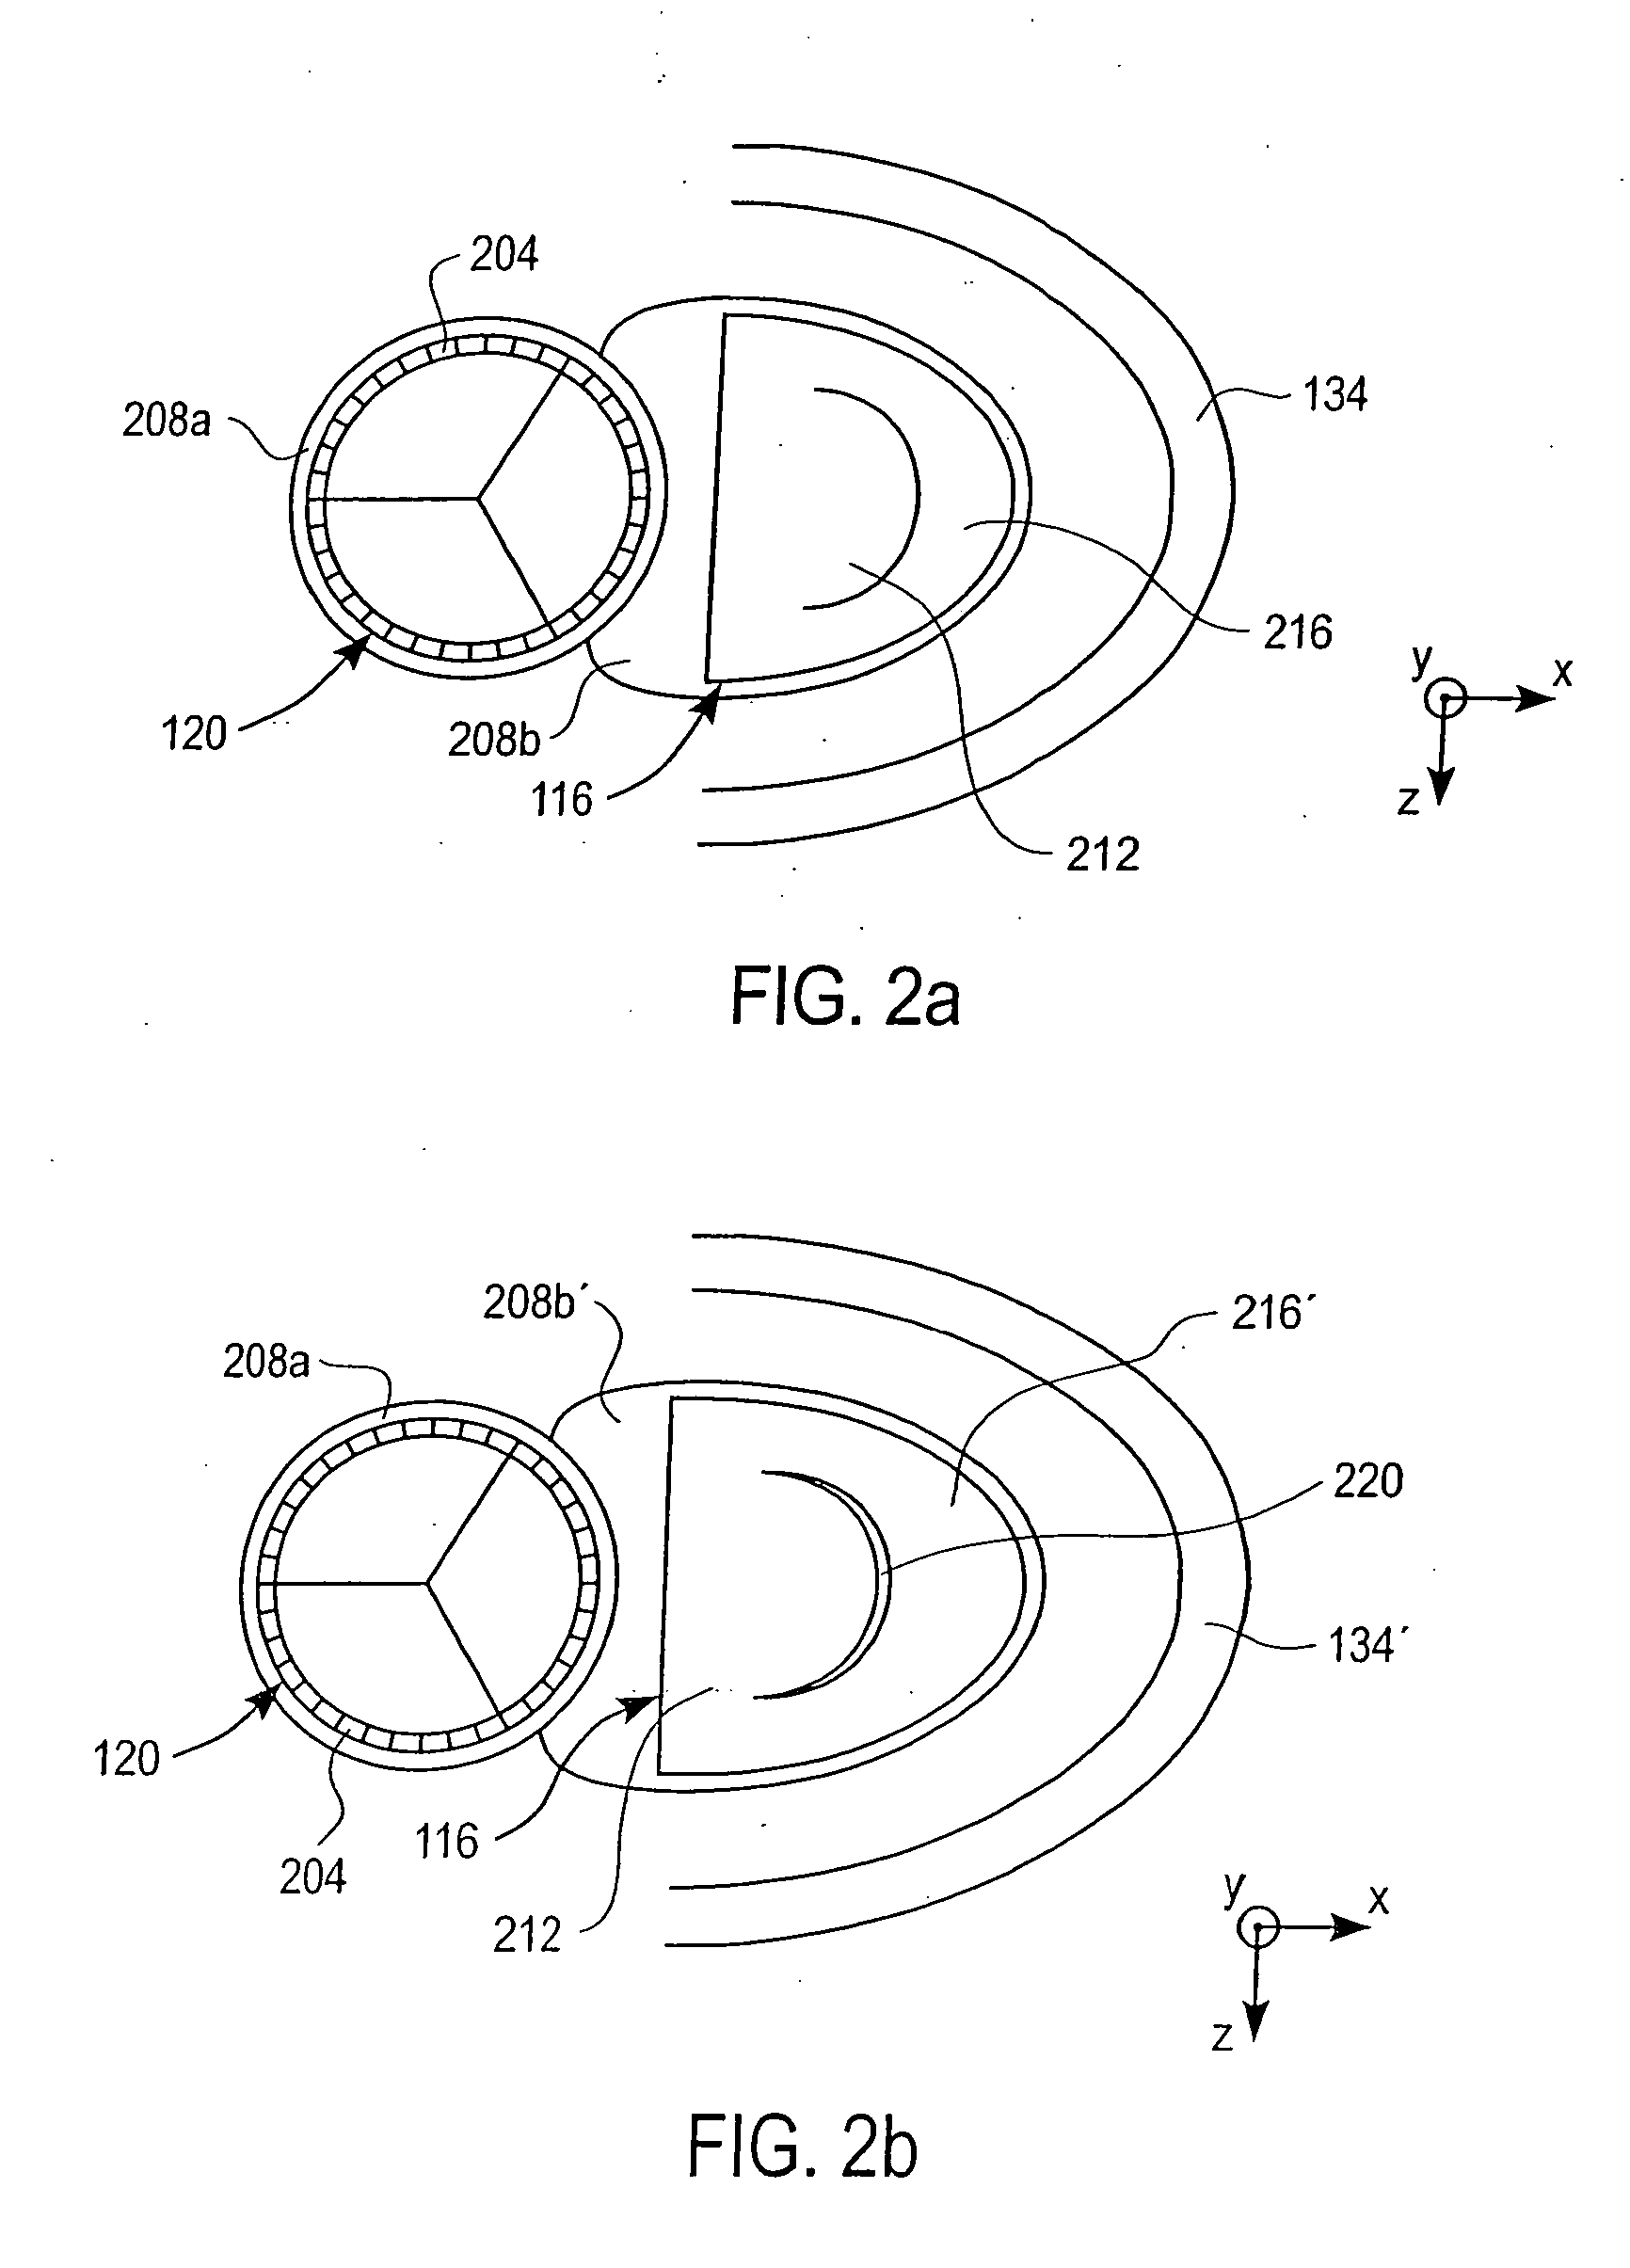 Method and apparatus for performing catheter-based annuloplasty using local plications